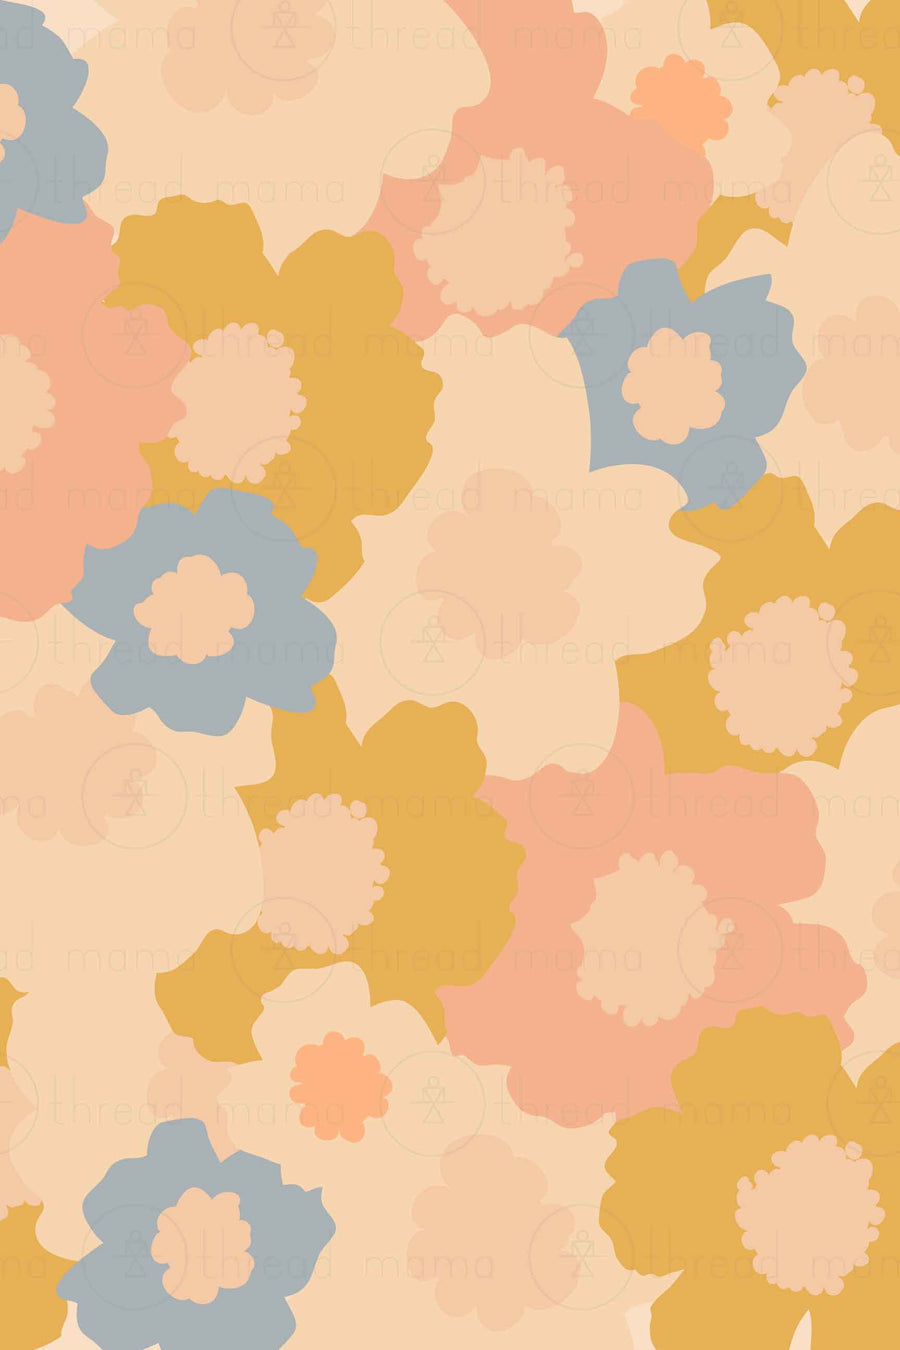 Repeating Pattern 53 (Seamless)